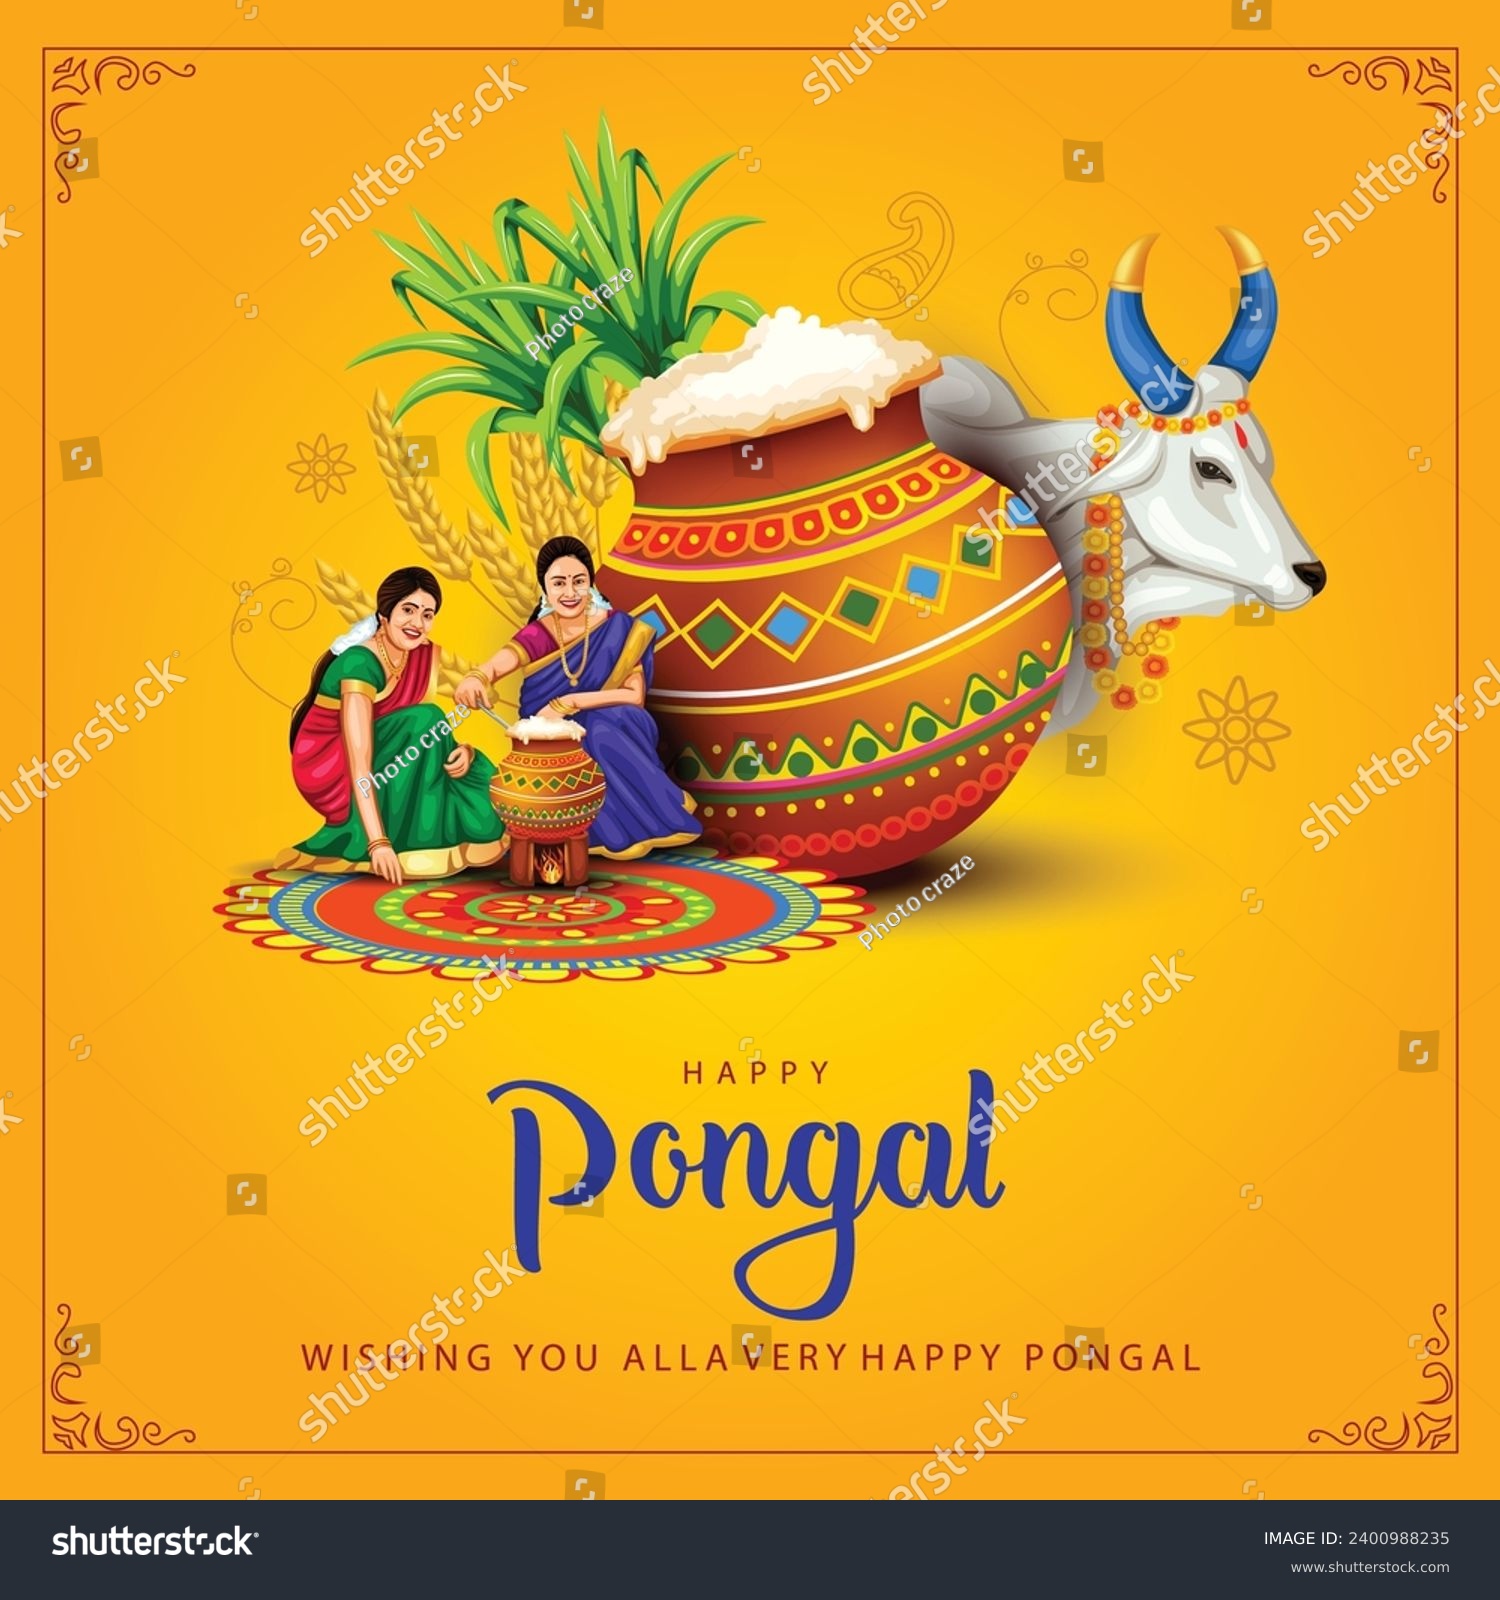 new illustration of Happy Pongal Holiday Harvest Festival of Tamil Nadu woman's making Pongal. vector background design #2400988235